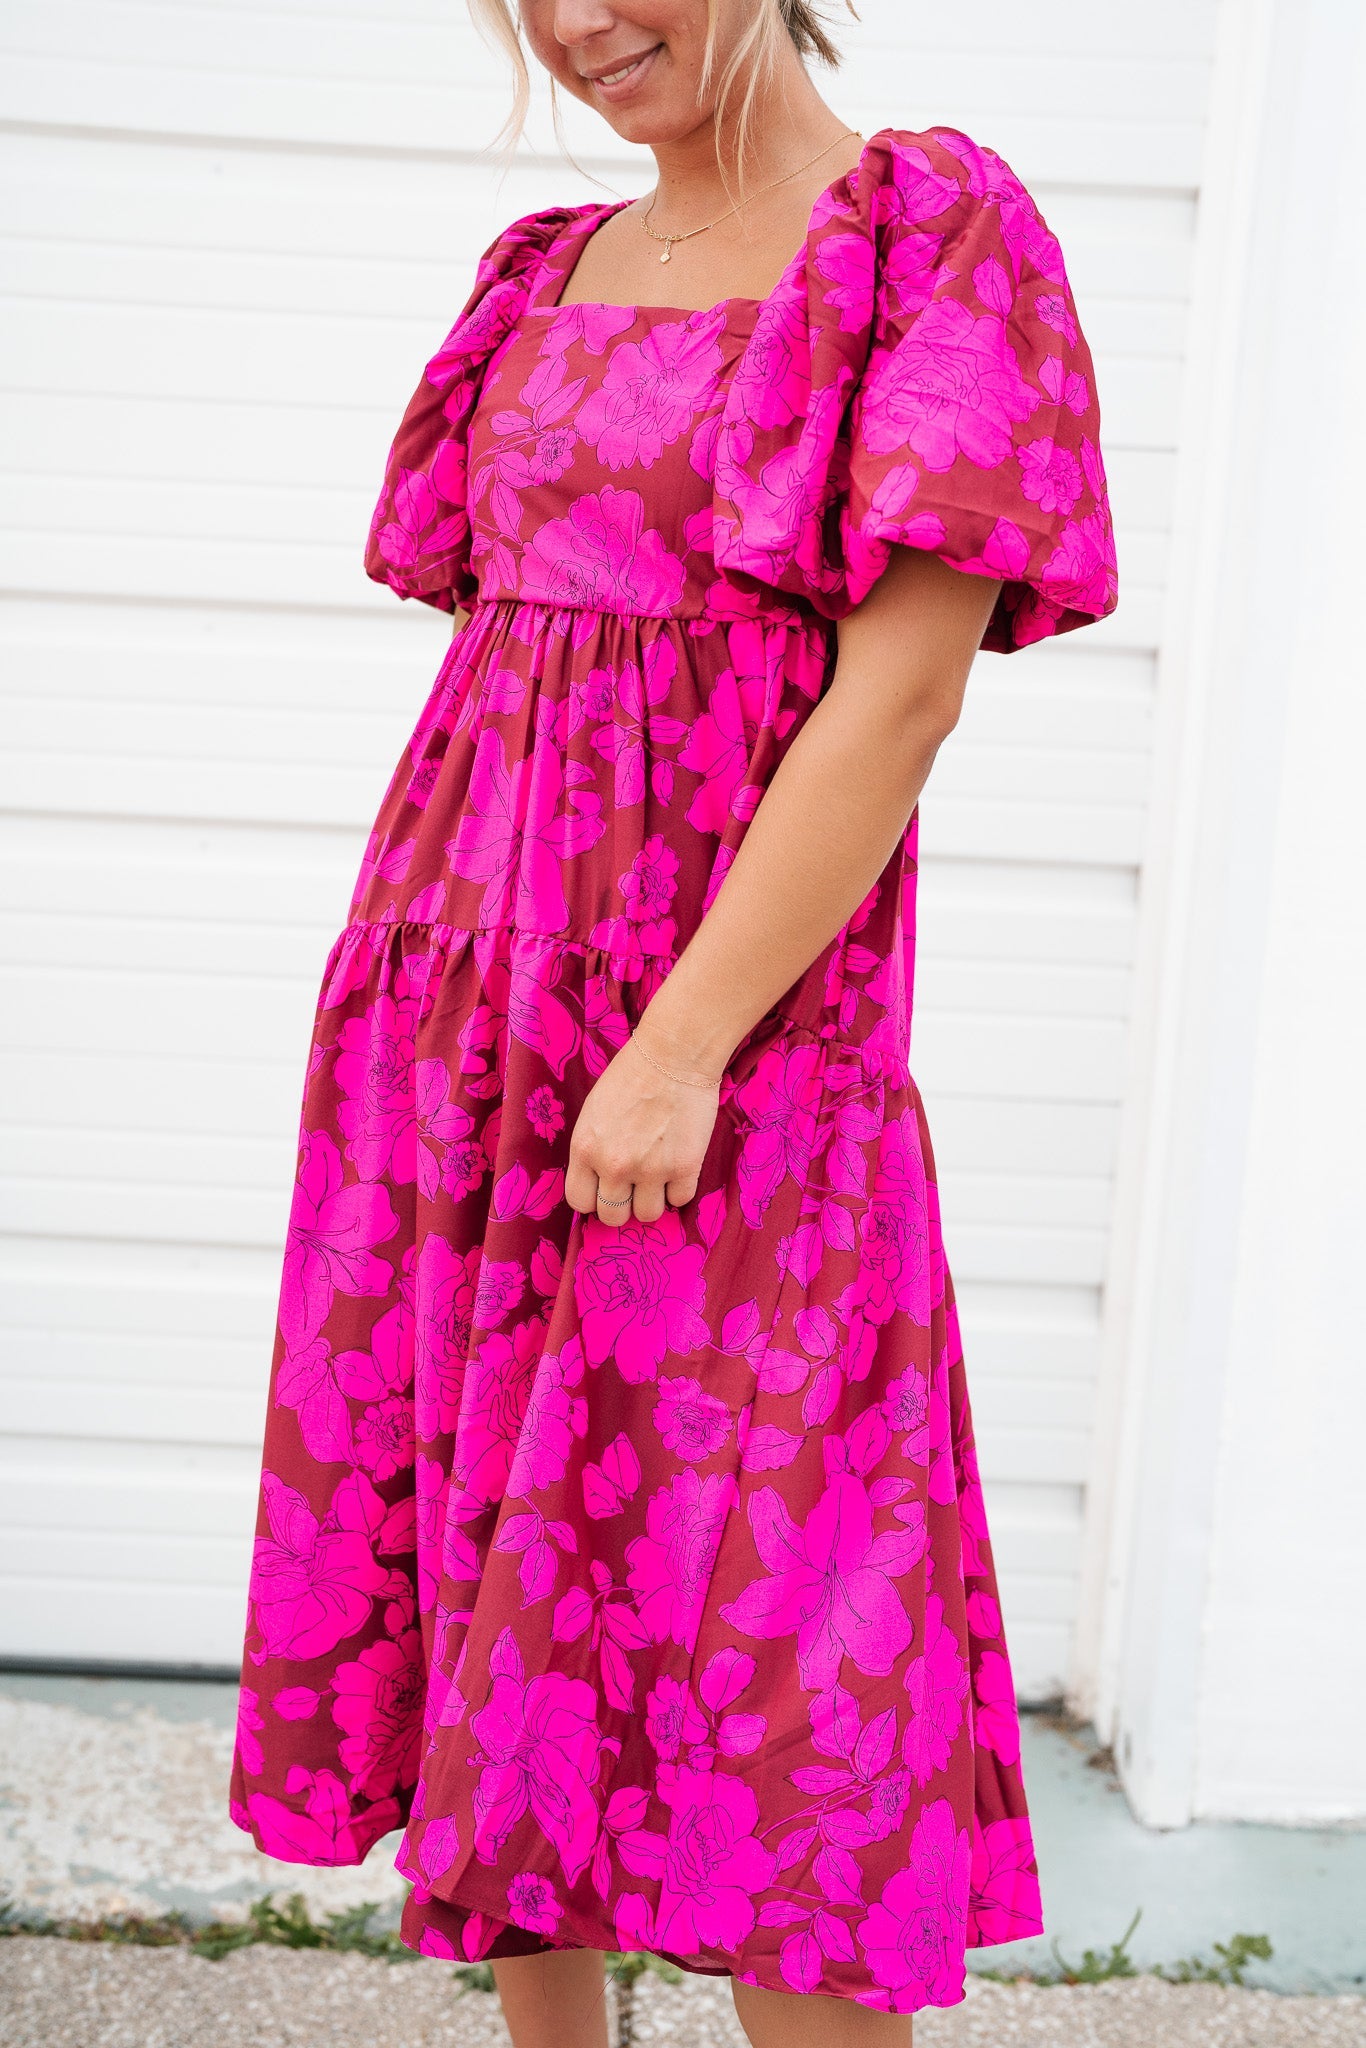 Never Get Over It Floral Puff Sleeve Dress